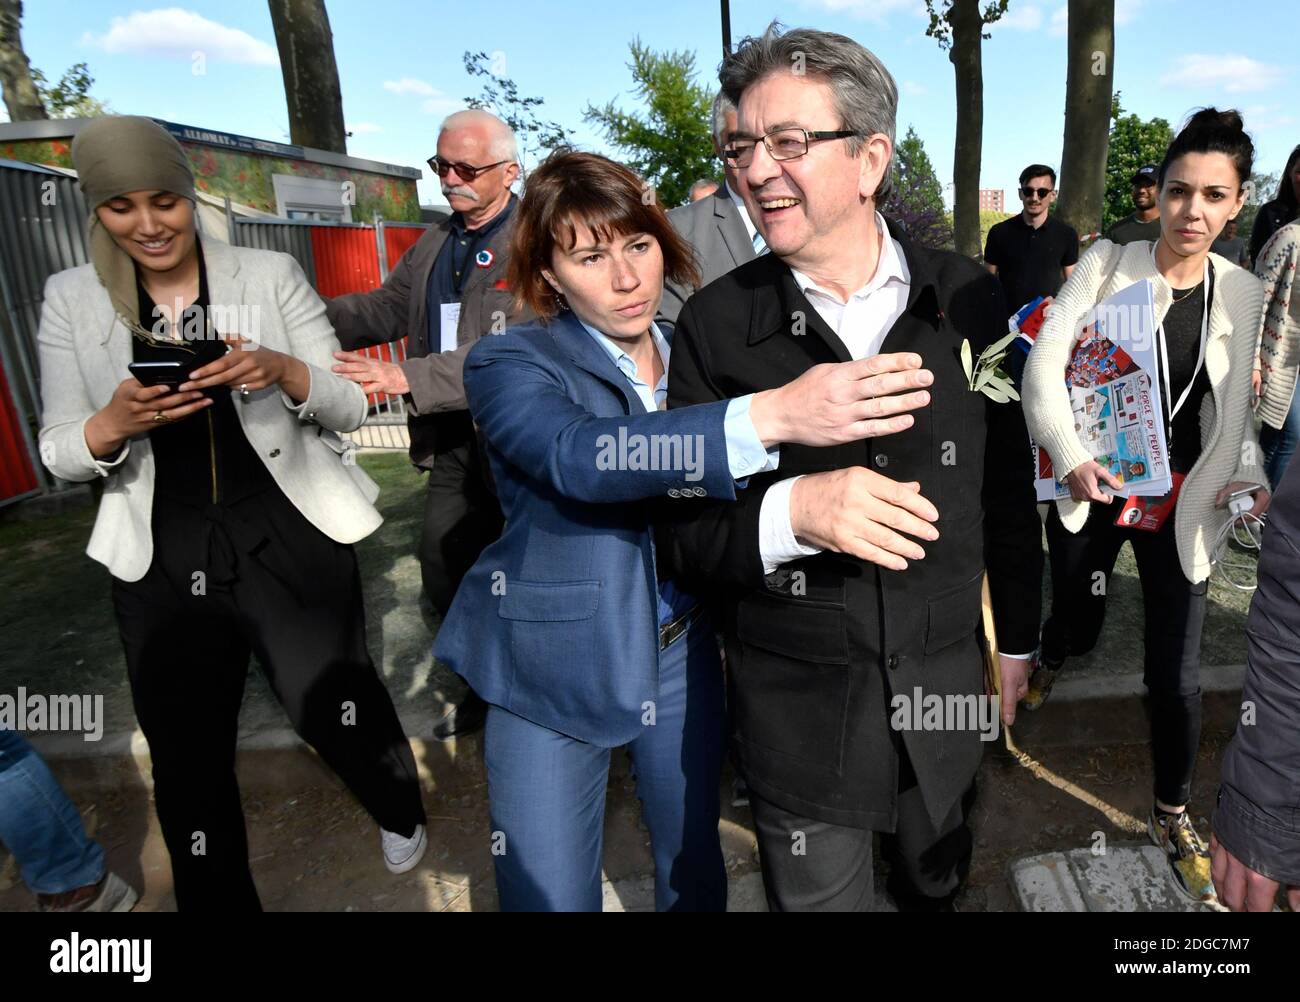 Presidential election candidate for the leftist coalition La France  Insoumise Jean-Luc Melenchon along with PR manager Sophia Chikirou (R)  greets supporters during a campaign rally at the Prairie de Filtres park in